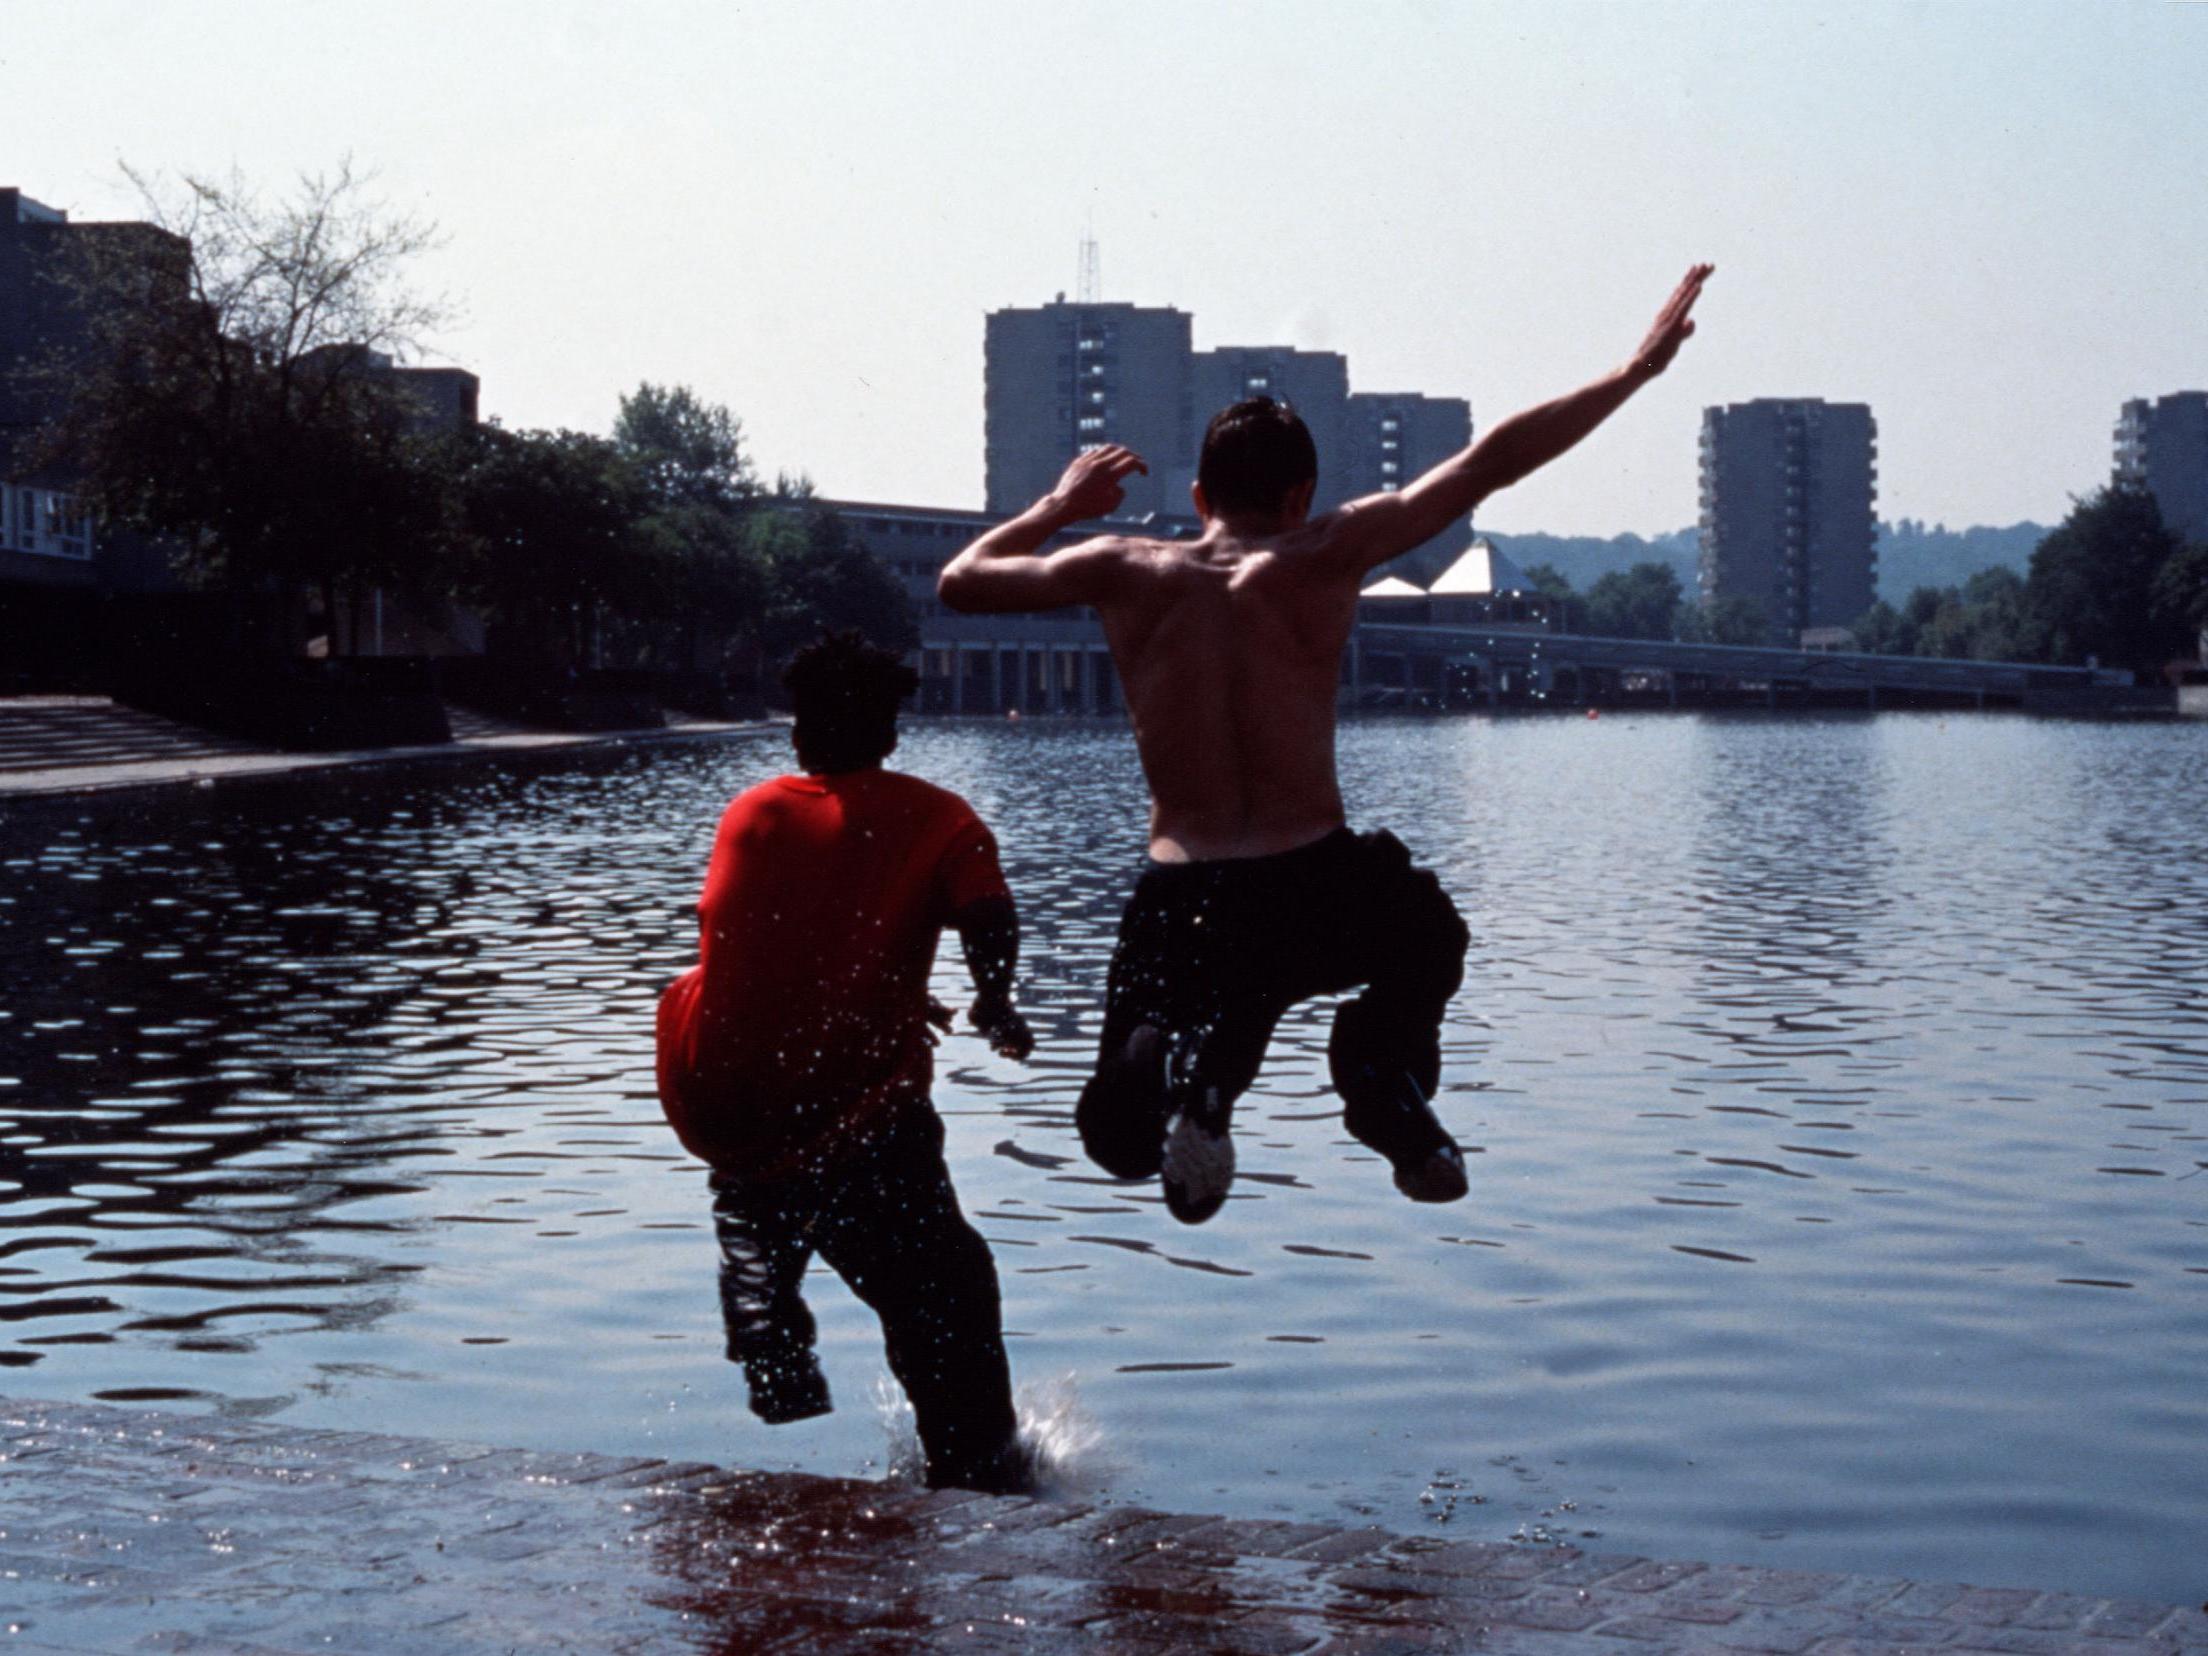 Ste and Jamie jump into the river in Hettie Macdonald’s ‘Beautiful Thing’